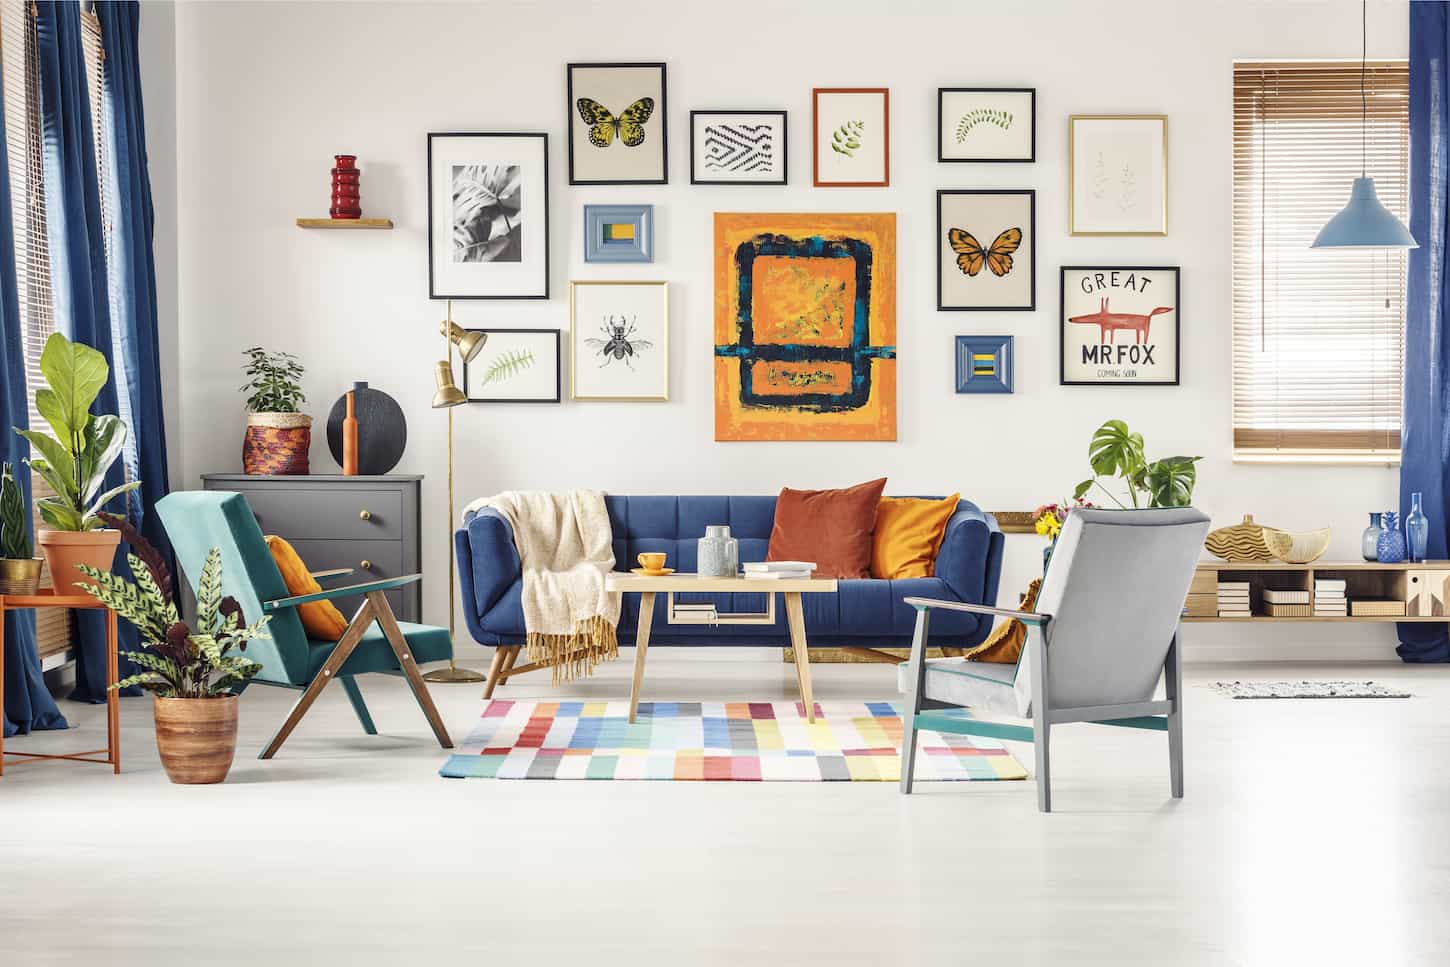 Wall Art Guide: Tips for Choosing the Perfect Piece